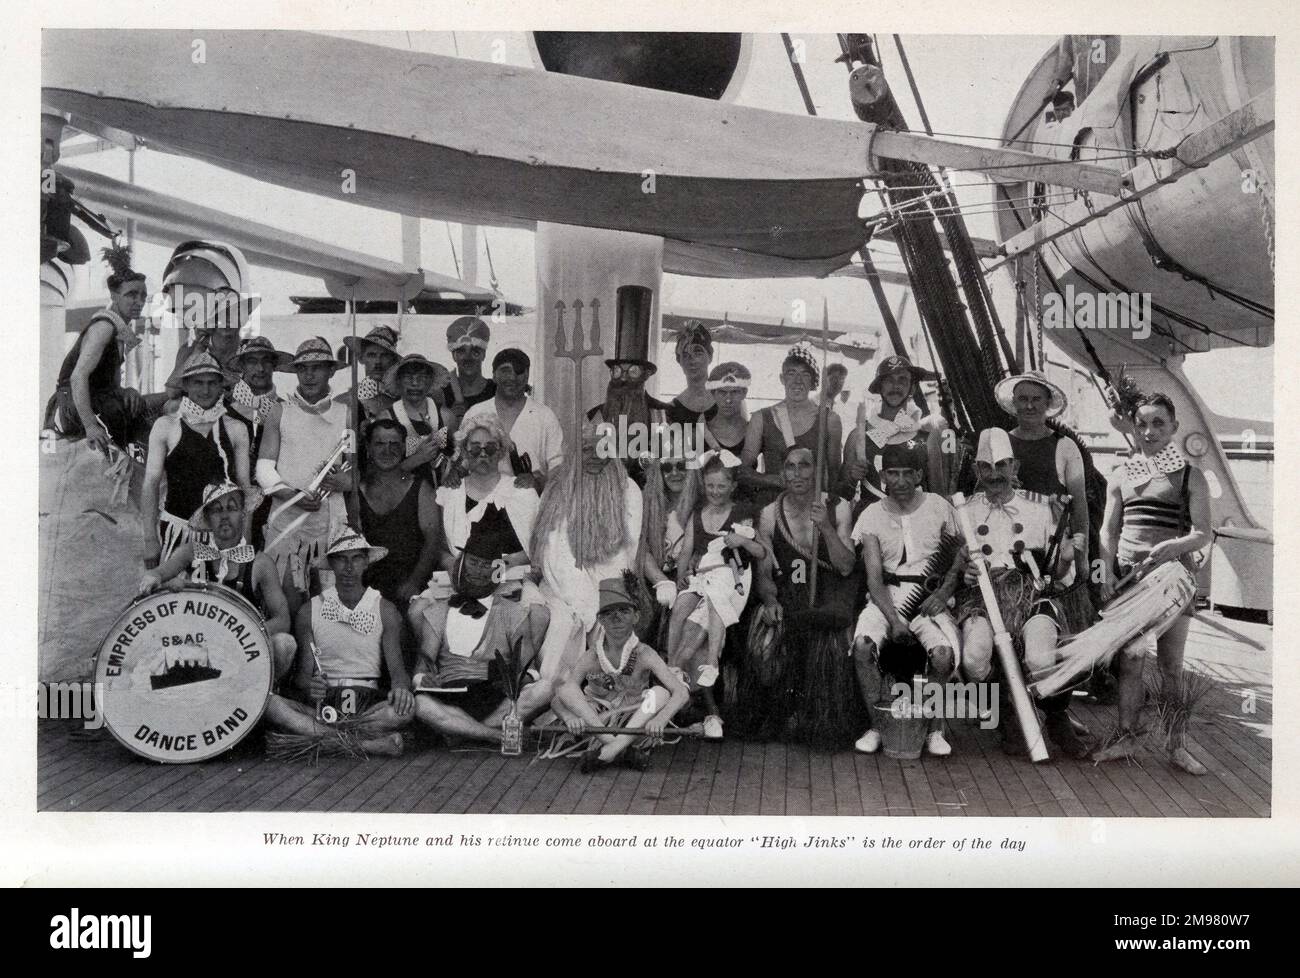 Dance Band members on the Canadian Pacific cruise liner, Empress of Australia.  They are wearing fancy dress, as part of the High Jinks tradition performed when crossing the Equator. Stock Photo